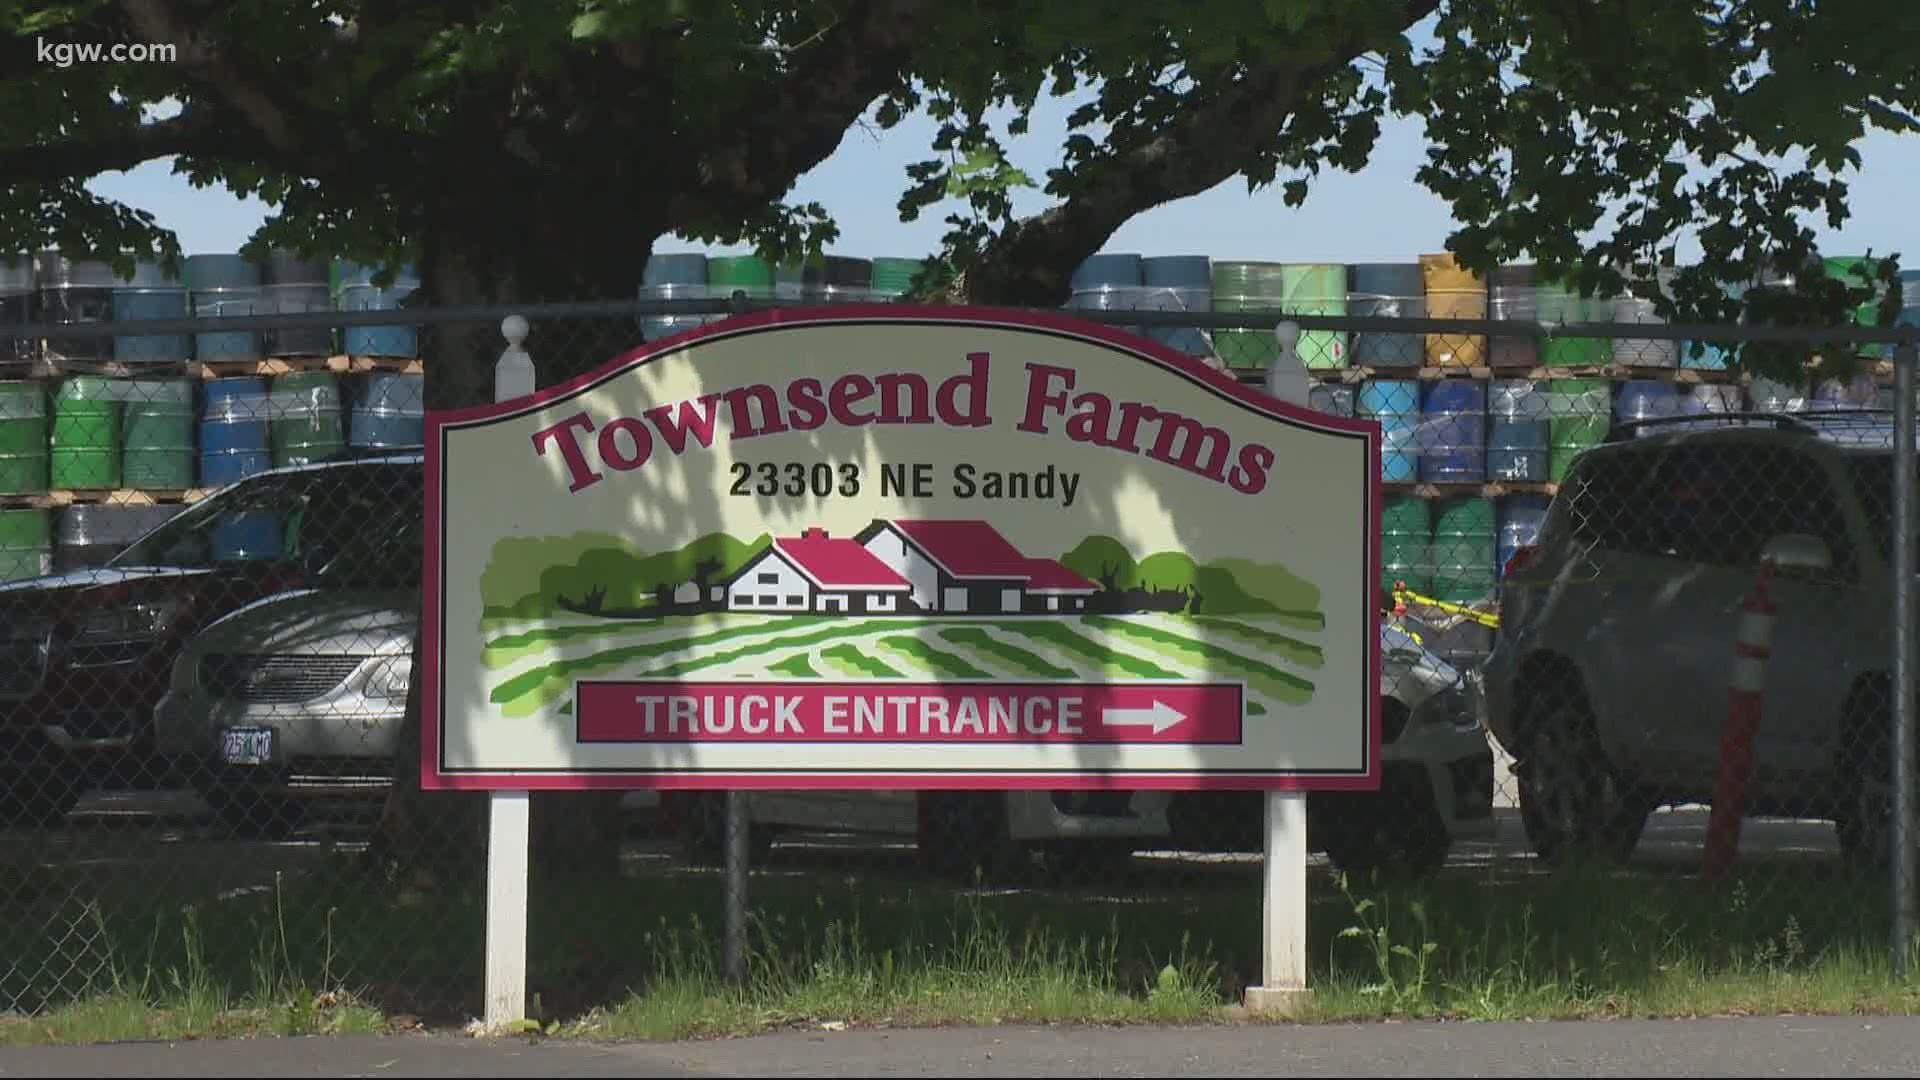 Townsend Farms identified as Portland-area business involved in coronavirus outbreak